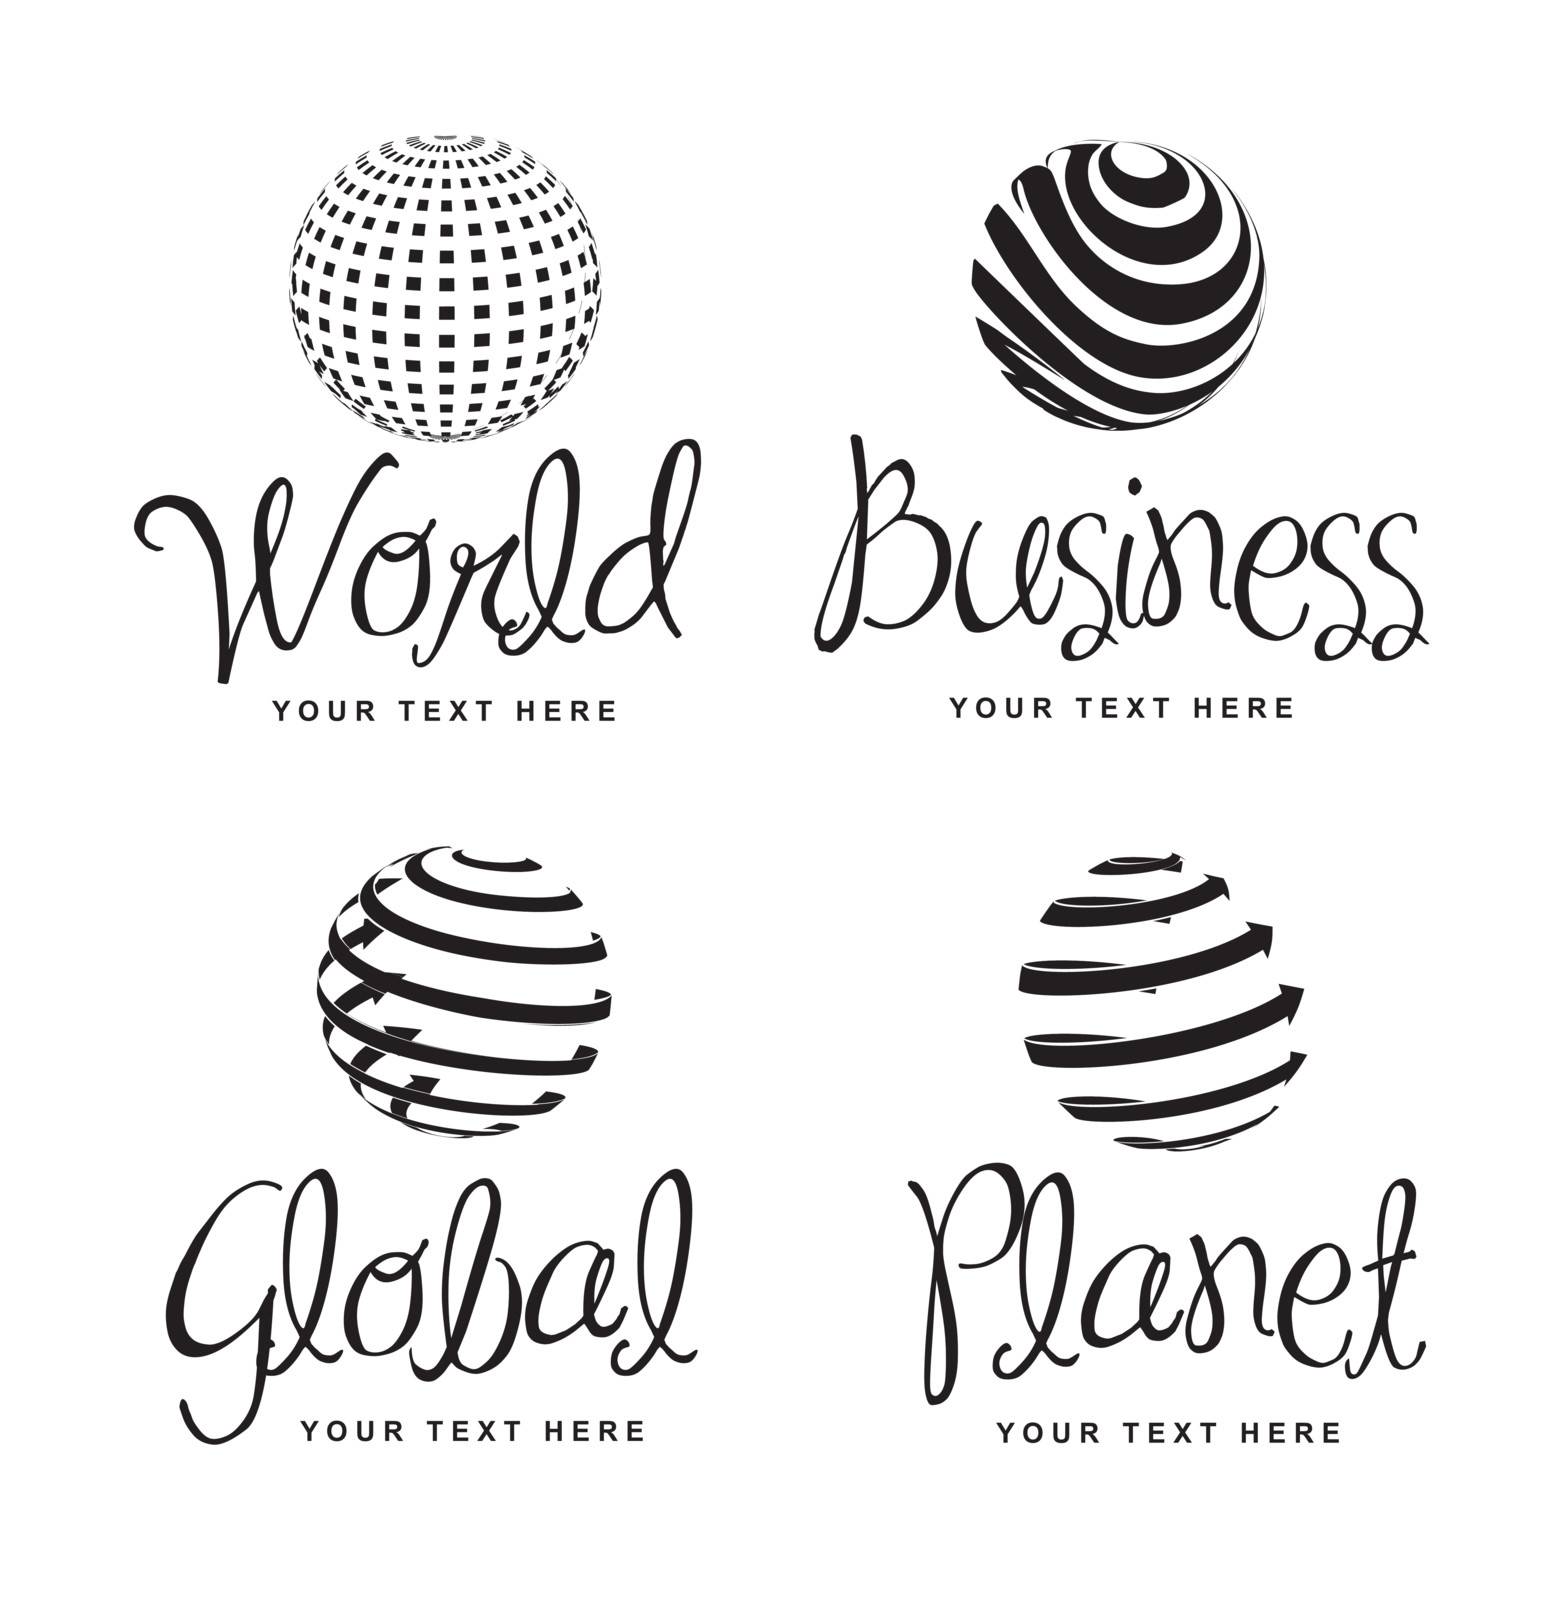 Icons of business, world, global and planet over white background  